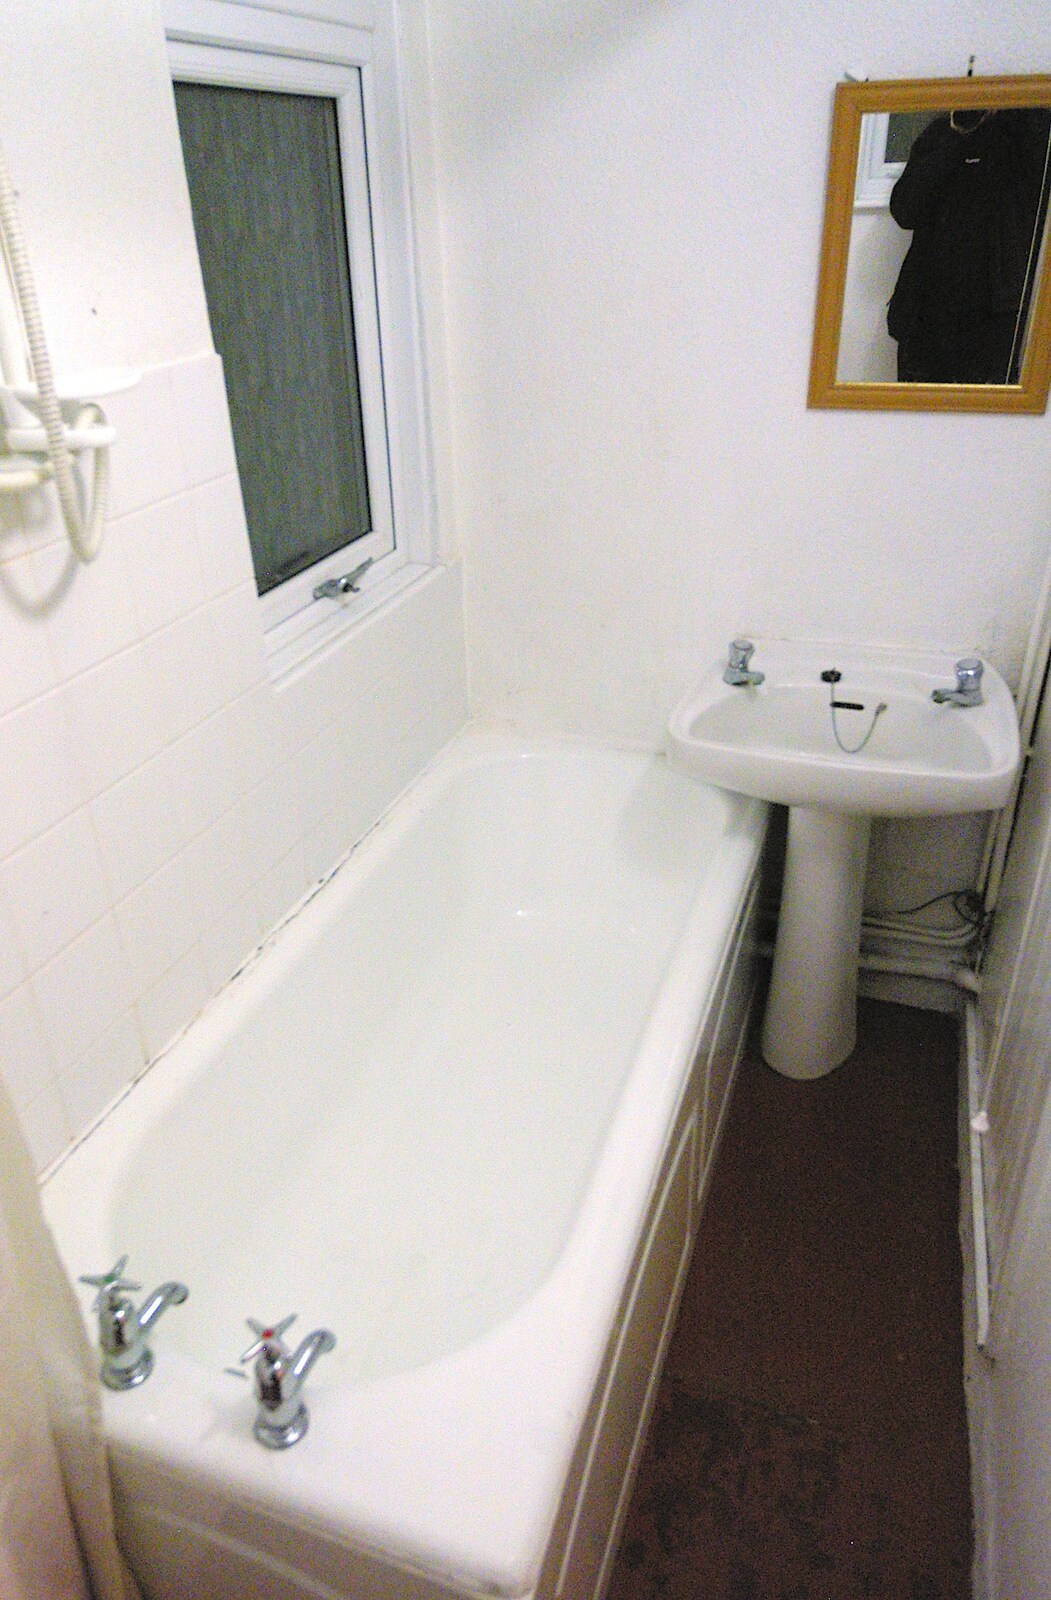 The Kingston Street bathroom from Qualcomm Christmas, The BBs and Isobel Moves Flats, Cambridge and Ascot, Berkshire - 2nd December 2006